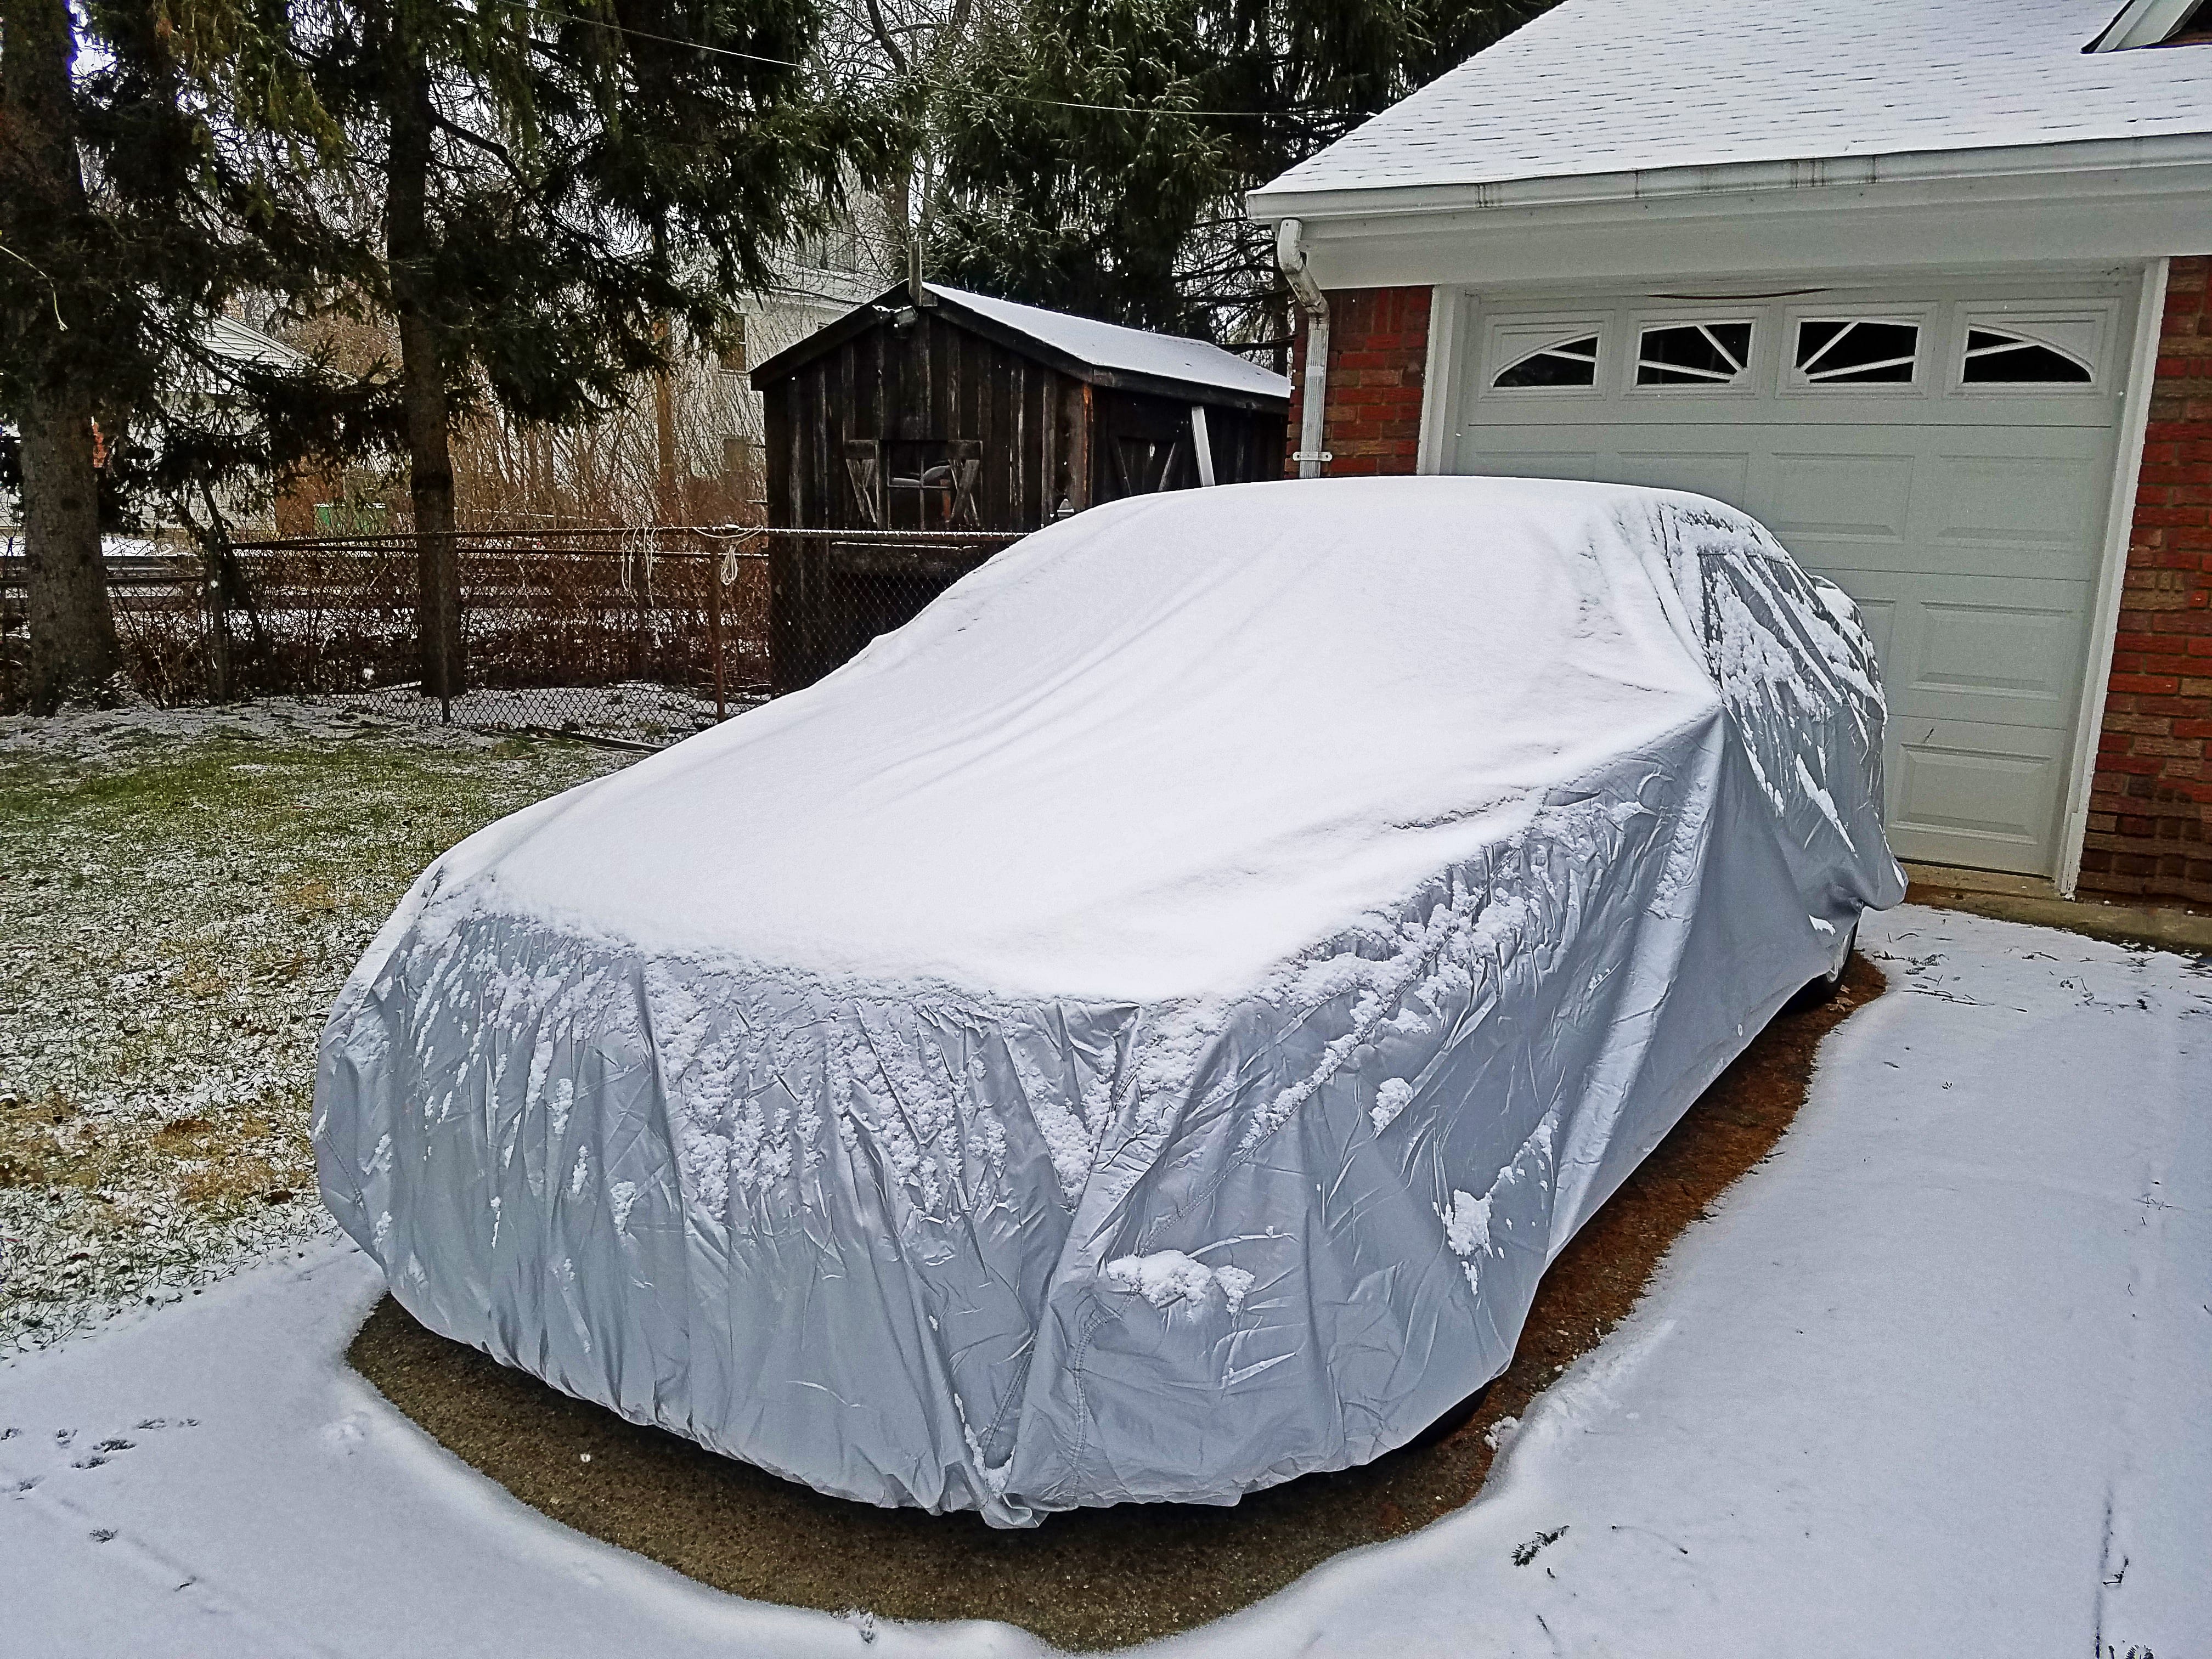 11 Clever Car Hacks to Survive Winter